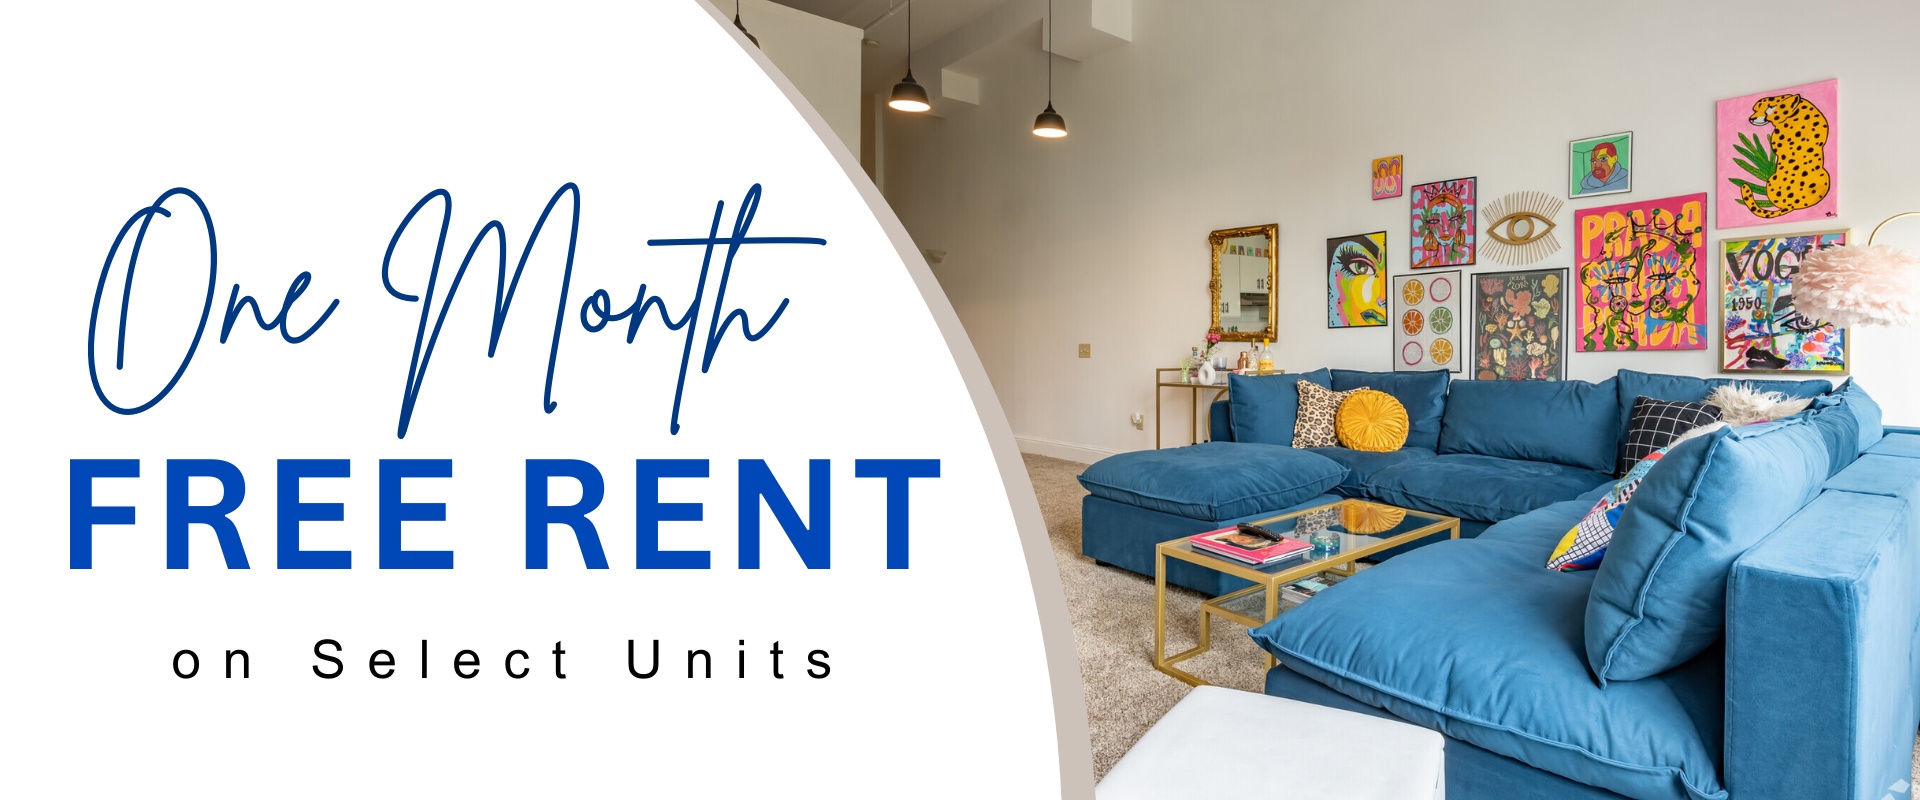 Dannenberg Lofts special,  One month free rent on selects units.